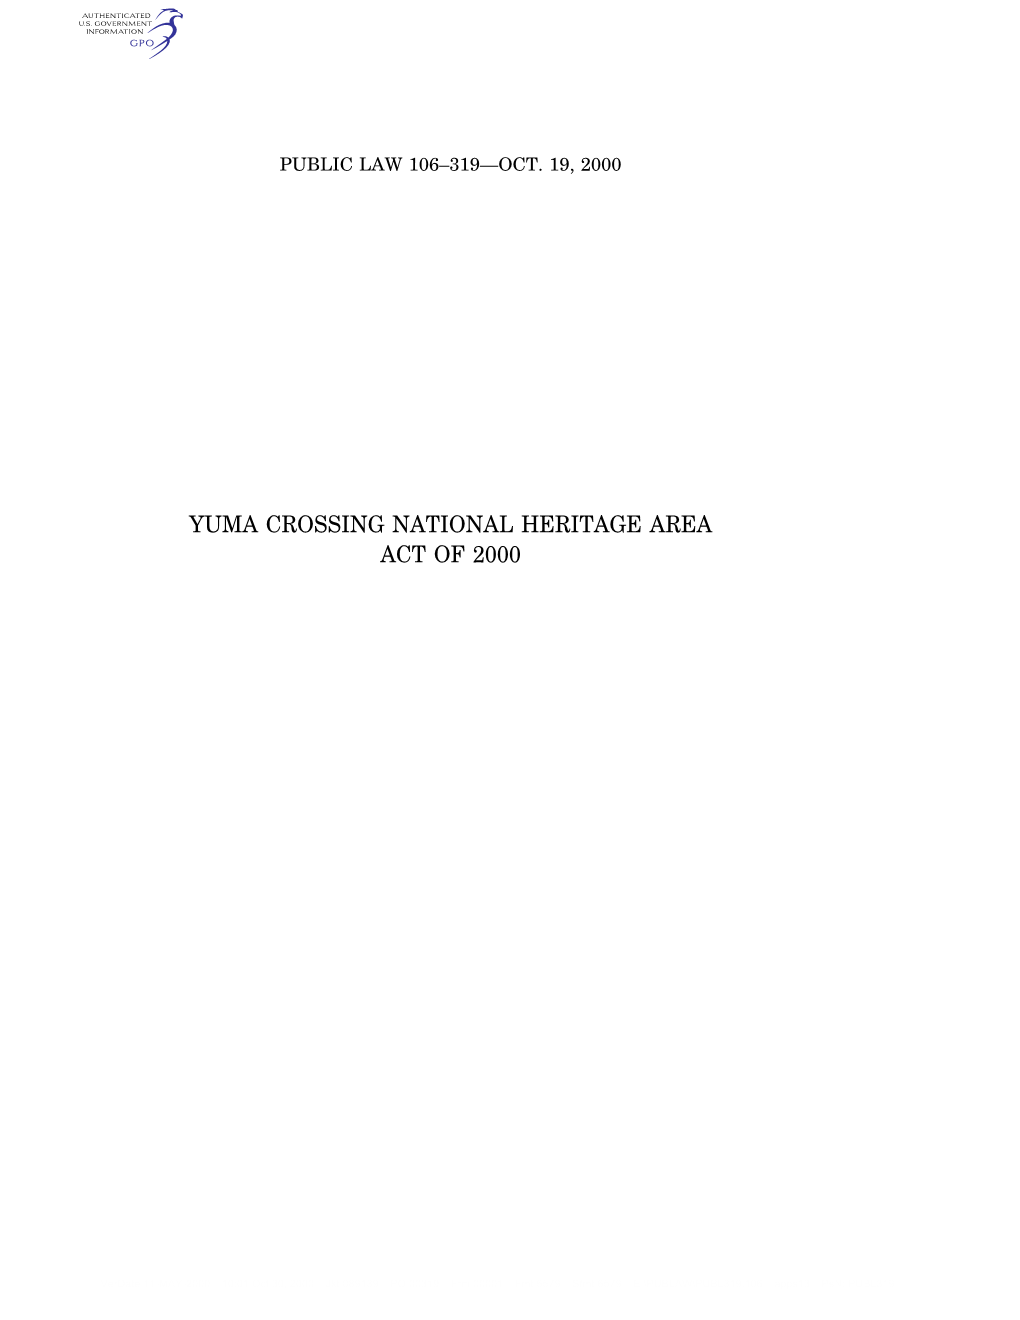 Yuma Crossing National Heritage Area Act of 2000